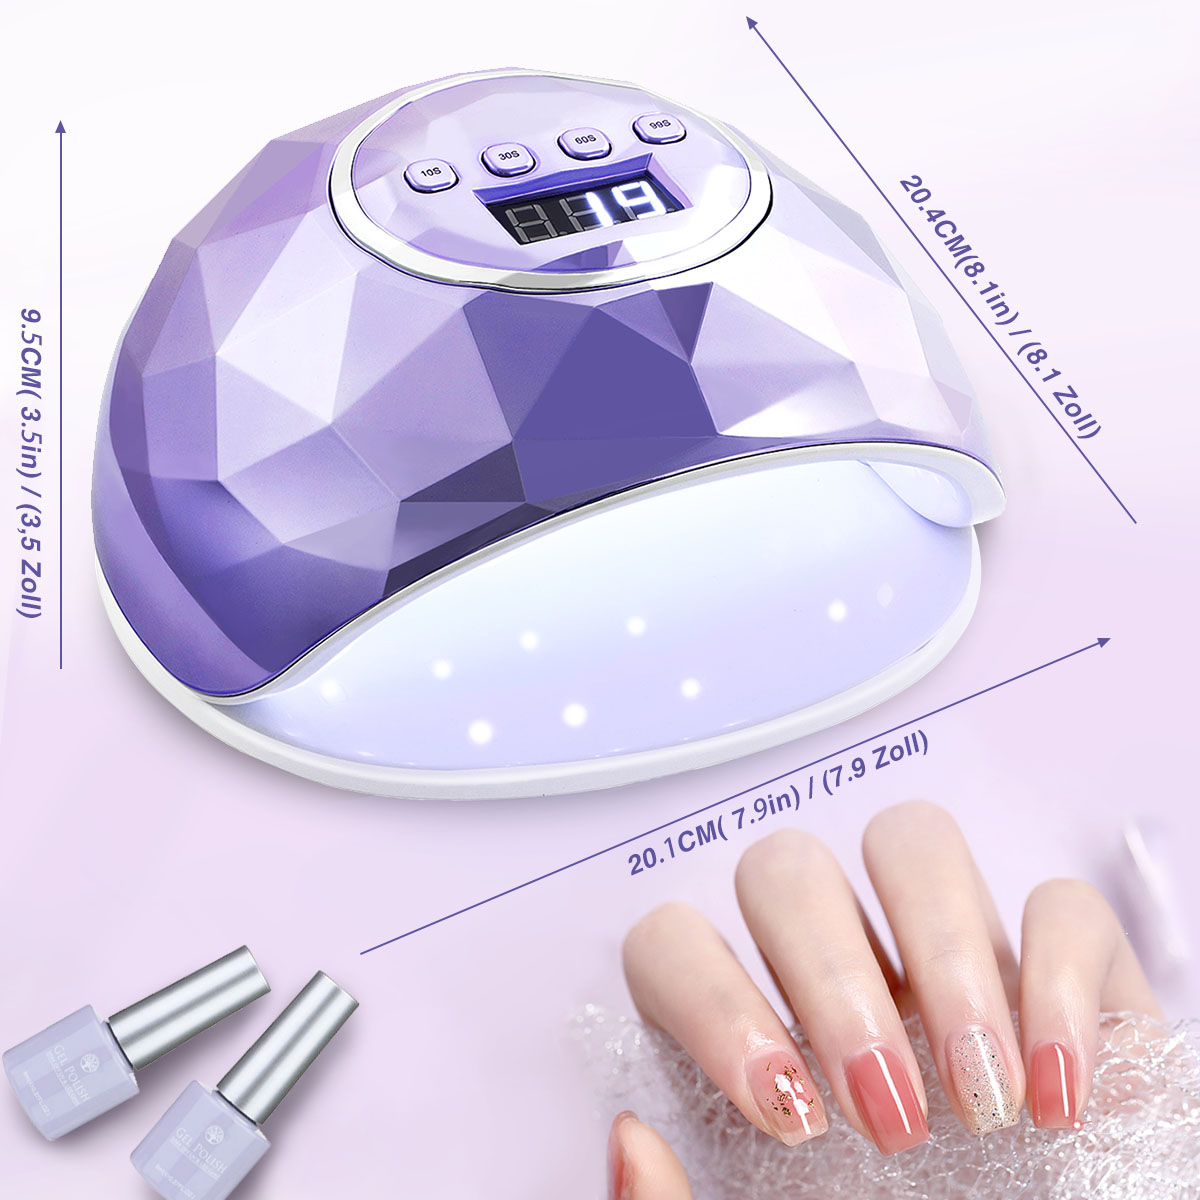 86W-UV-LED-Nail-Lamp-Automatic-Curing-Nail-Dryer-LCD-Display-Manicure-Pedicure-Tools-1844147-6